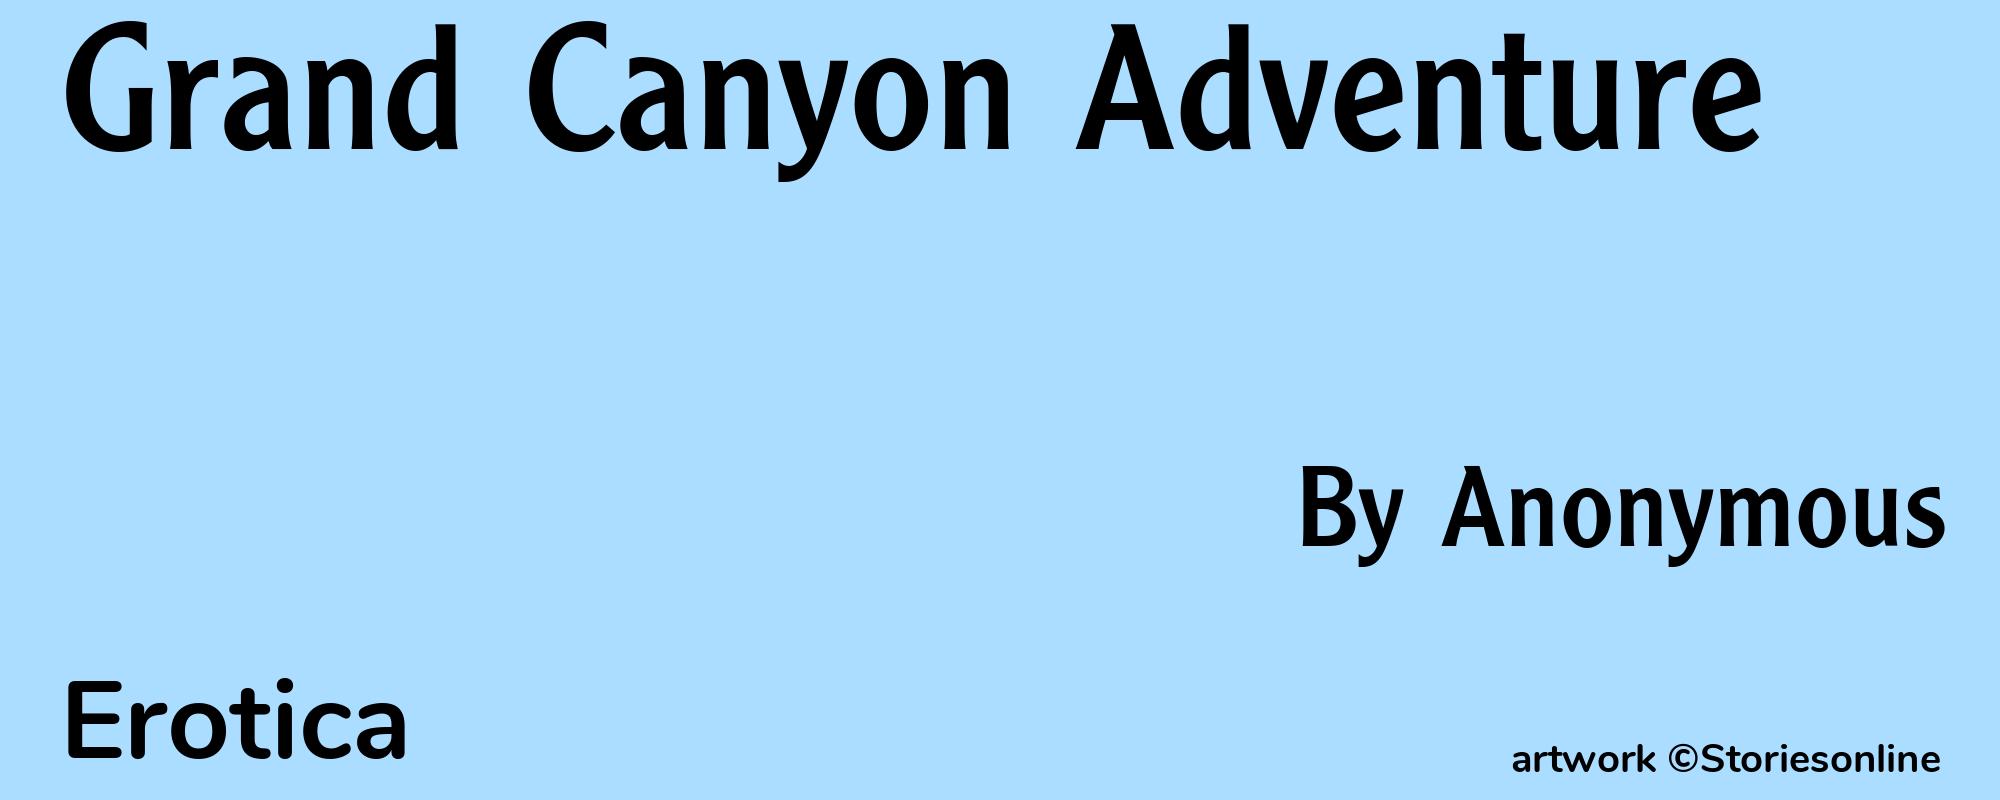 Grand Canyon Adventure - Cover